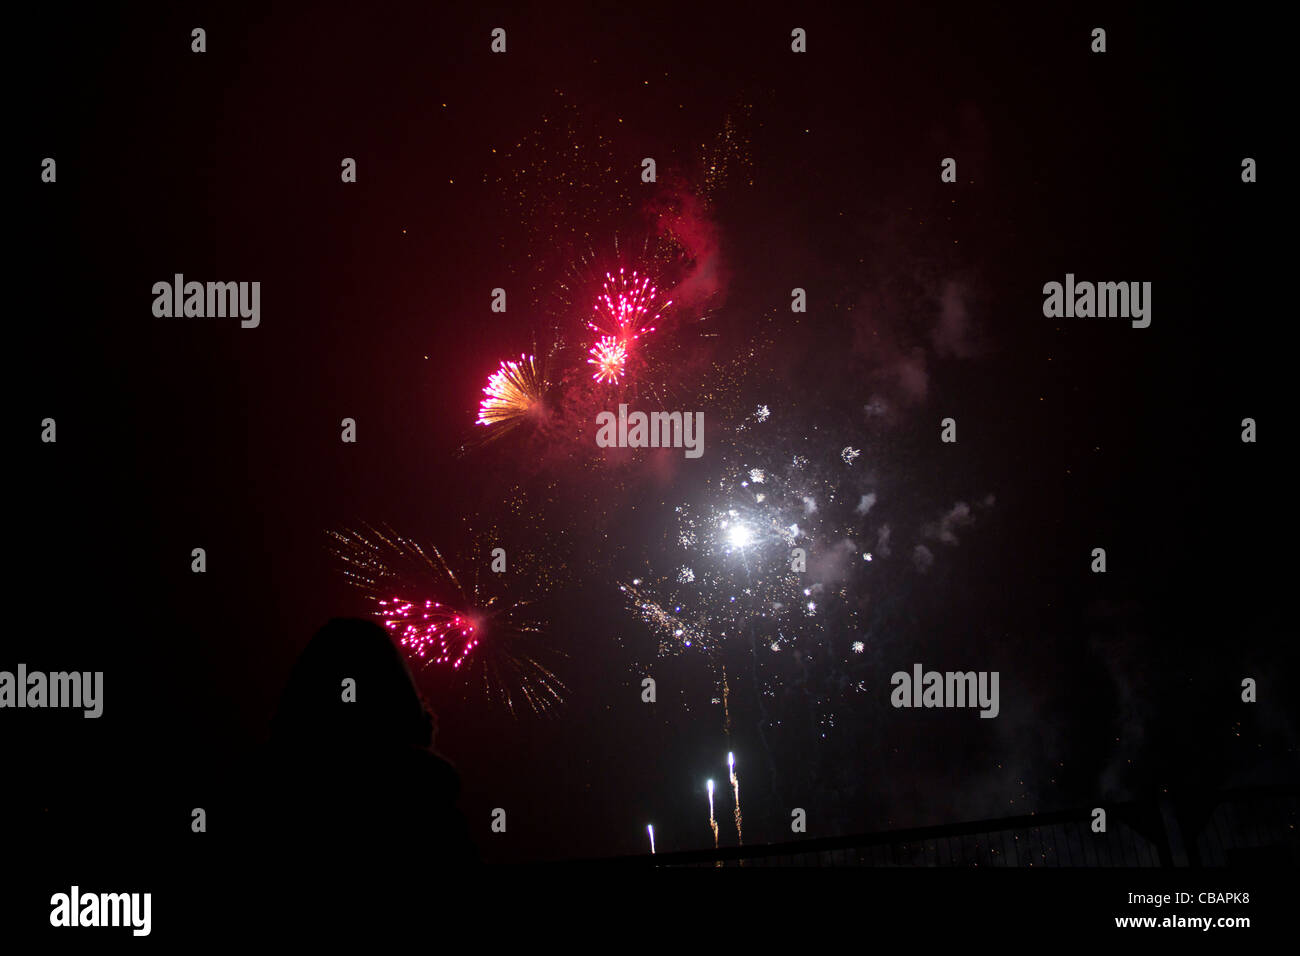 Fireworks display in London. Small bright red, pink and white explosions illuminate the night sky creating a beautiful show. Stock Photo